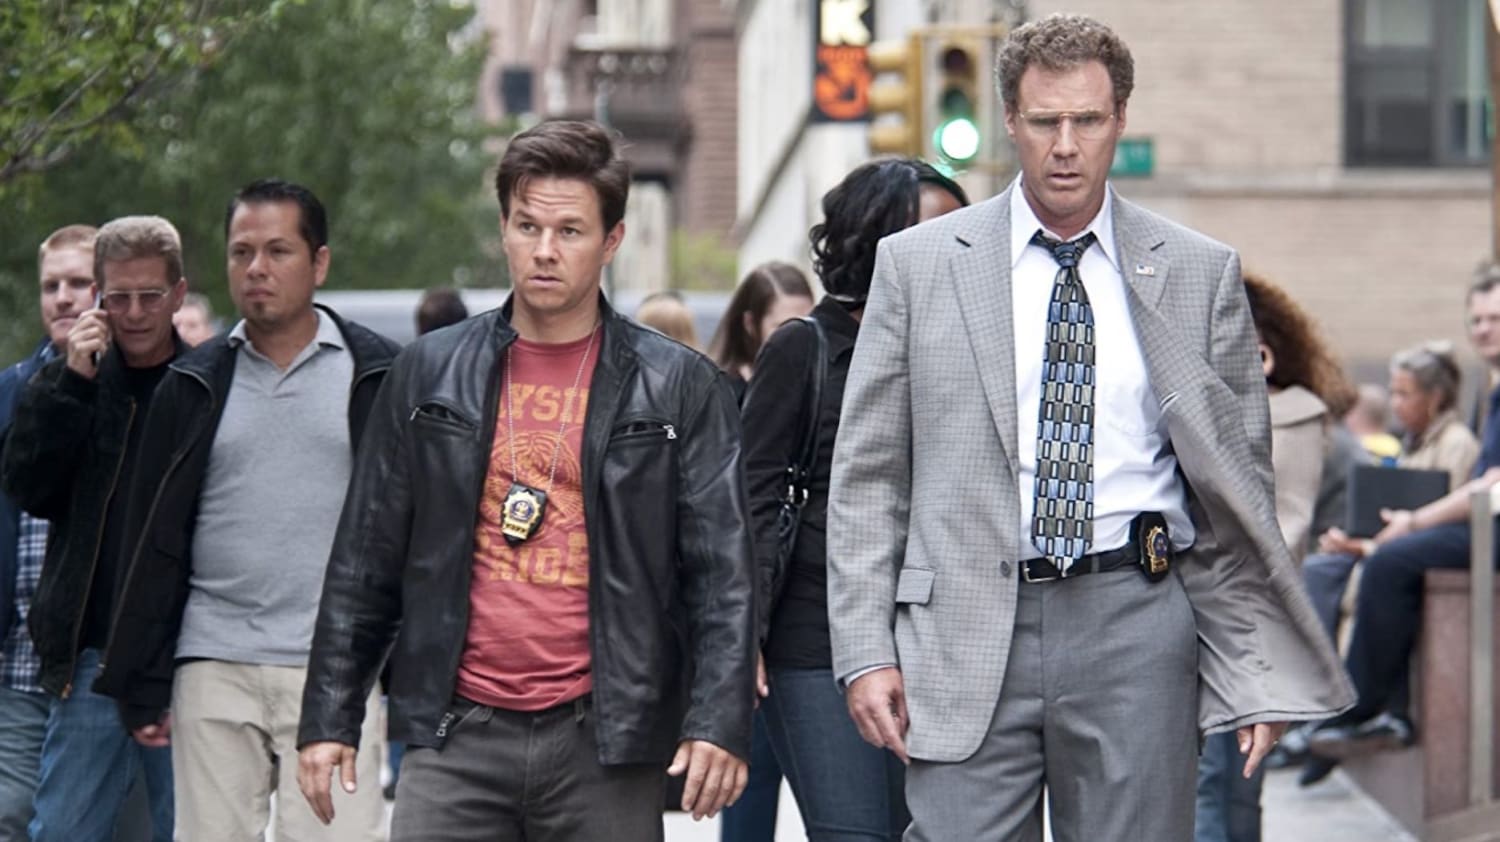 16 Facts About The Other Guys On Its 10th Anniversary, Courtesy of Adam McKay